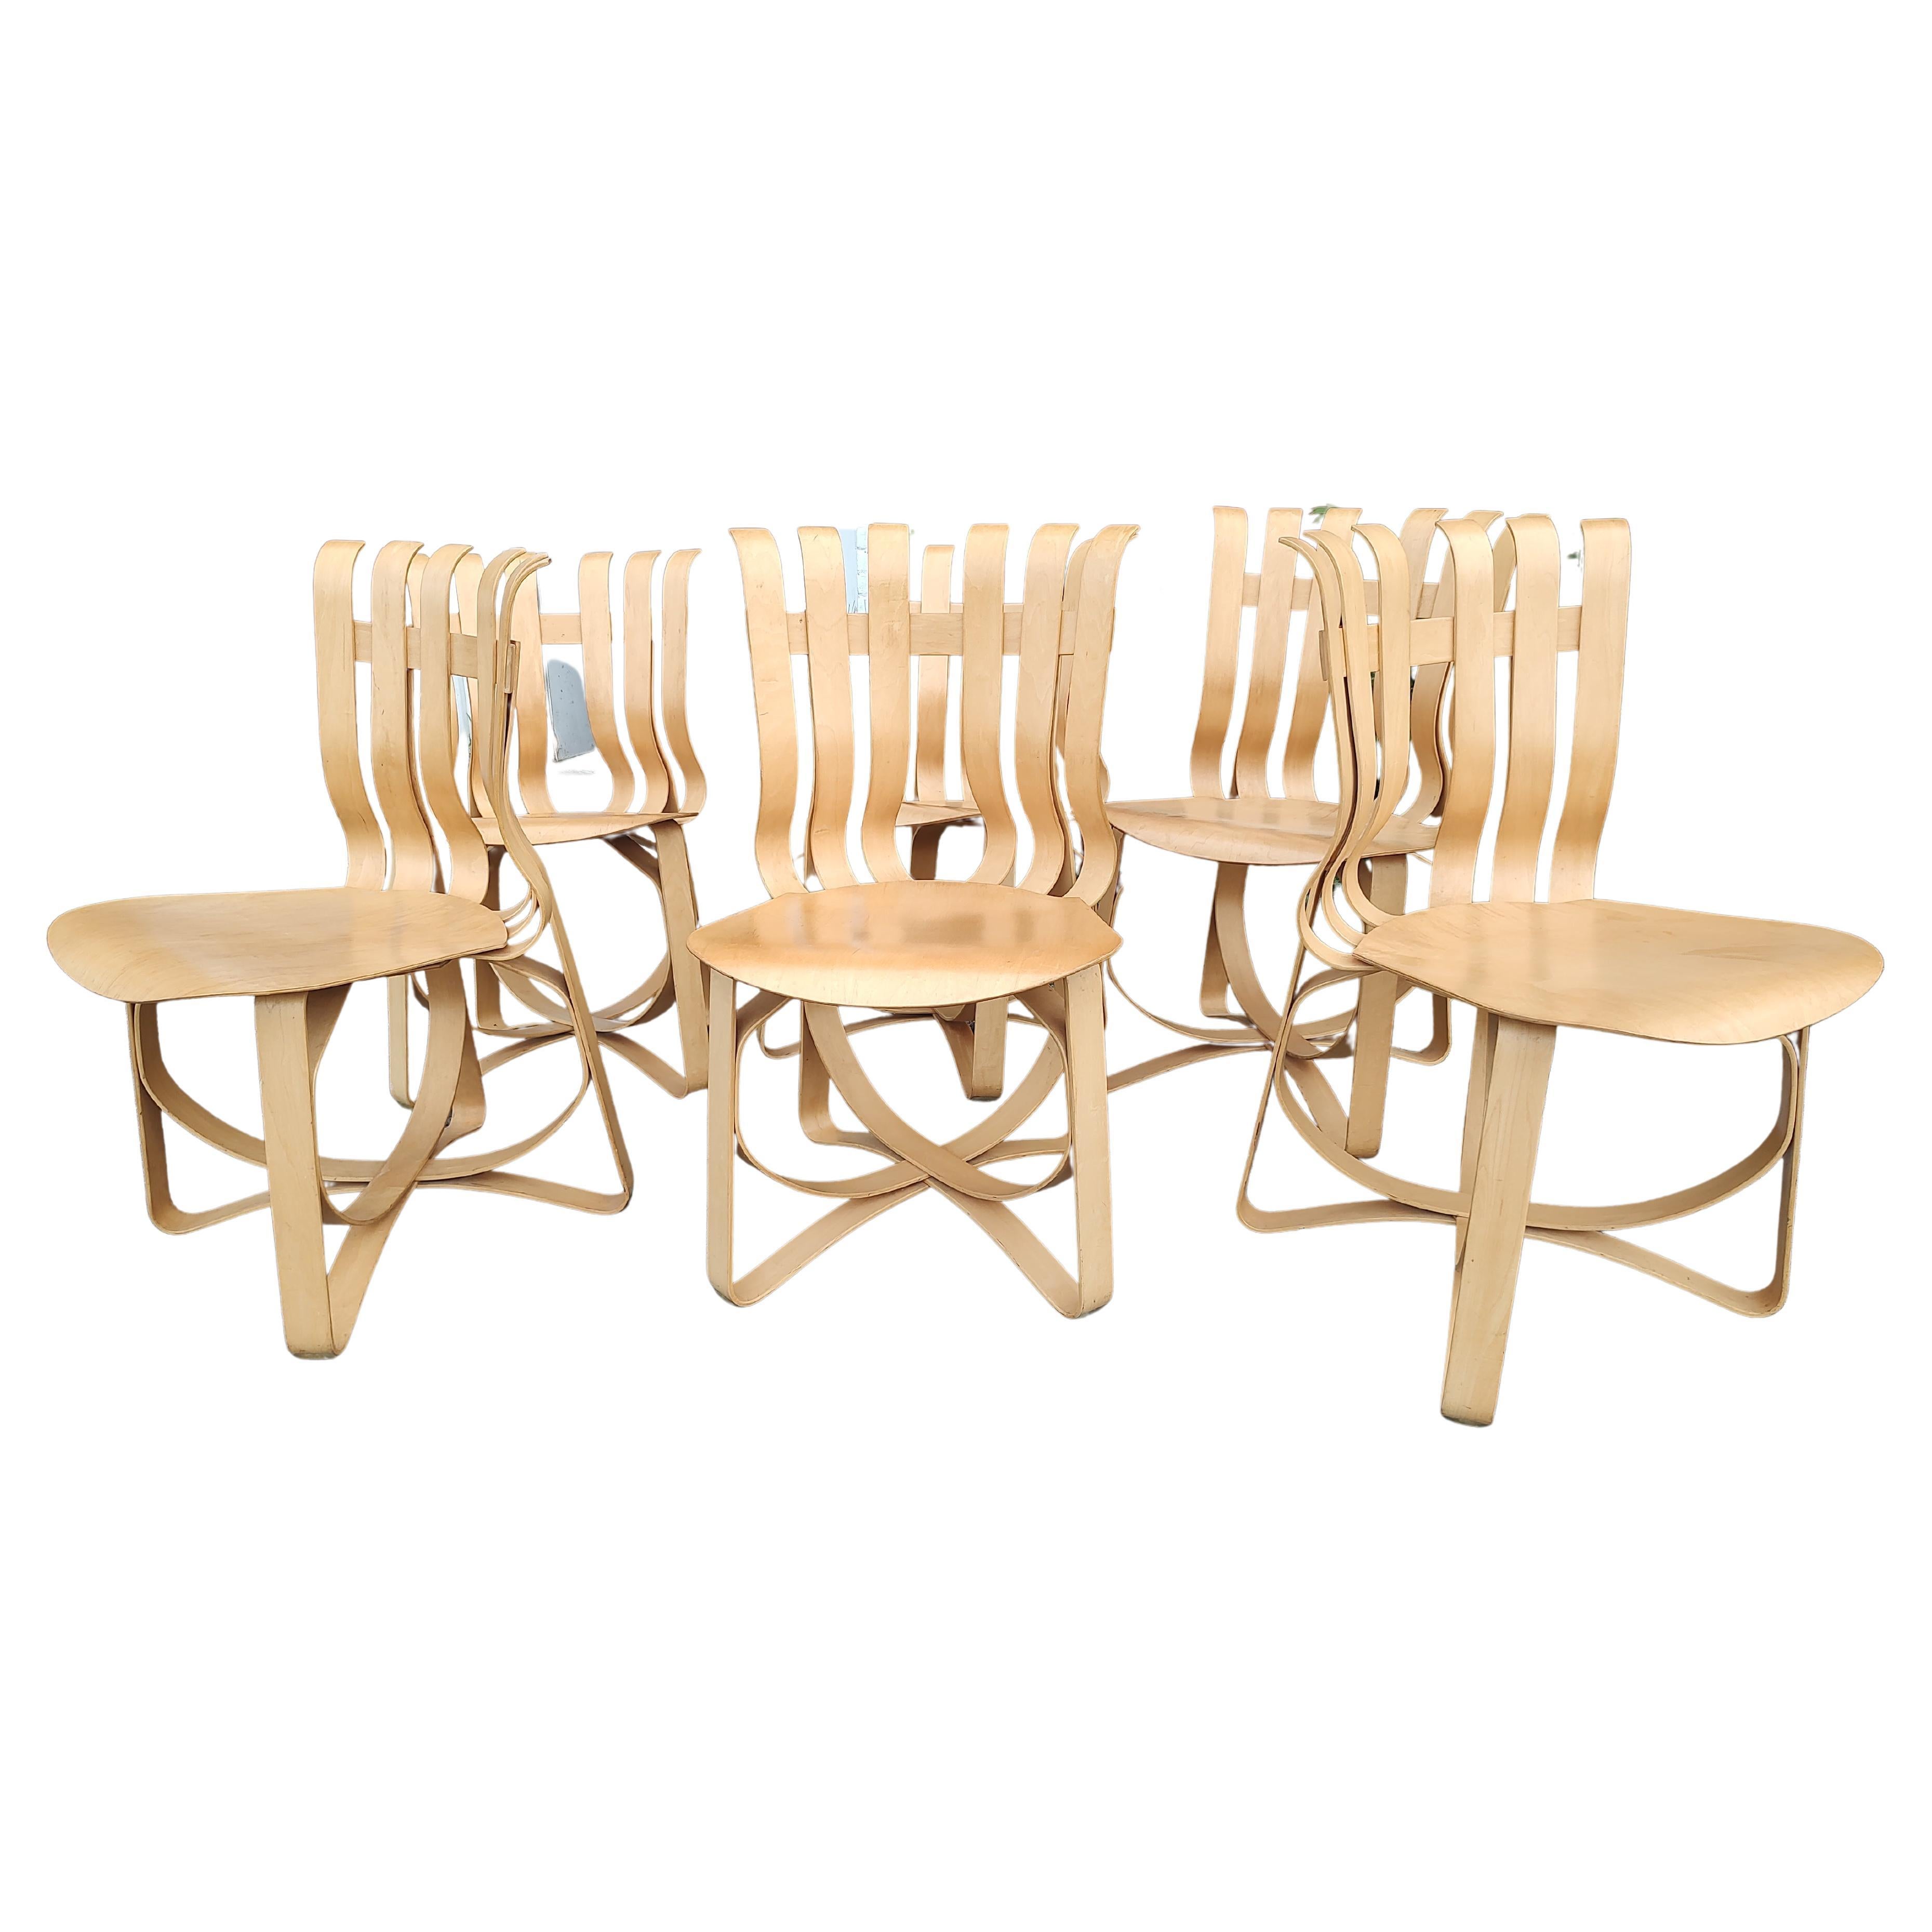 Mid Century Modern Sculptural Birch 6 Hat Trick Chairs by Frank Gehry - Knoll For Sale 1